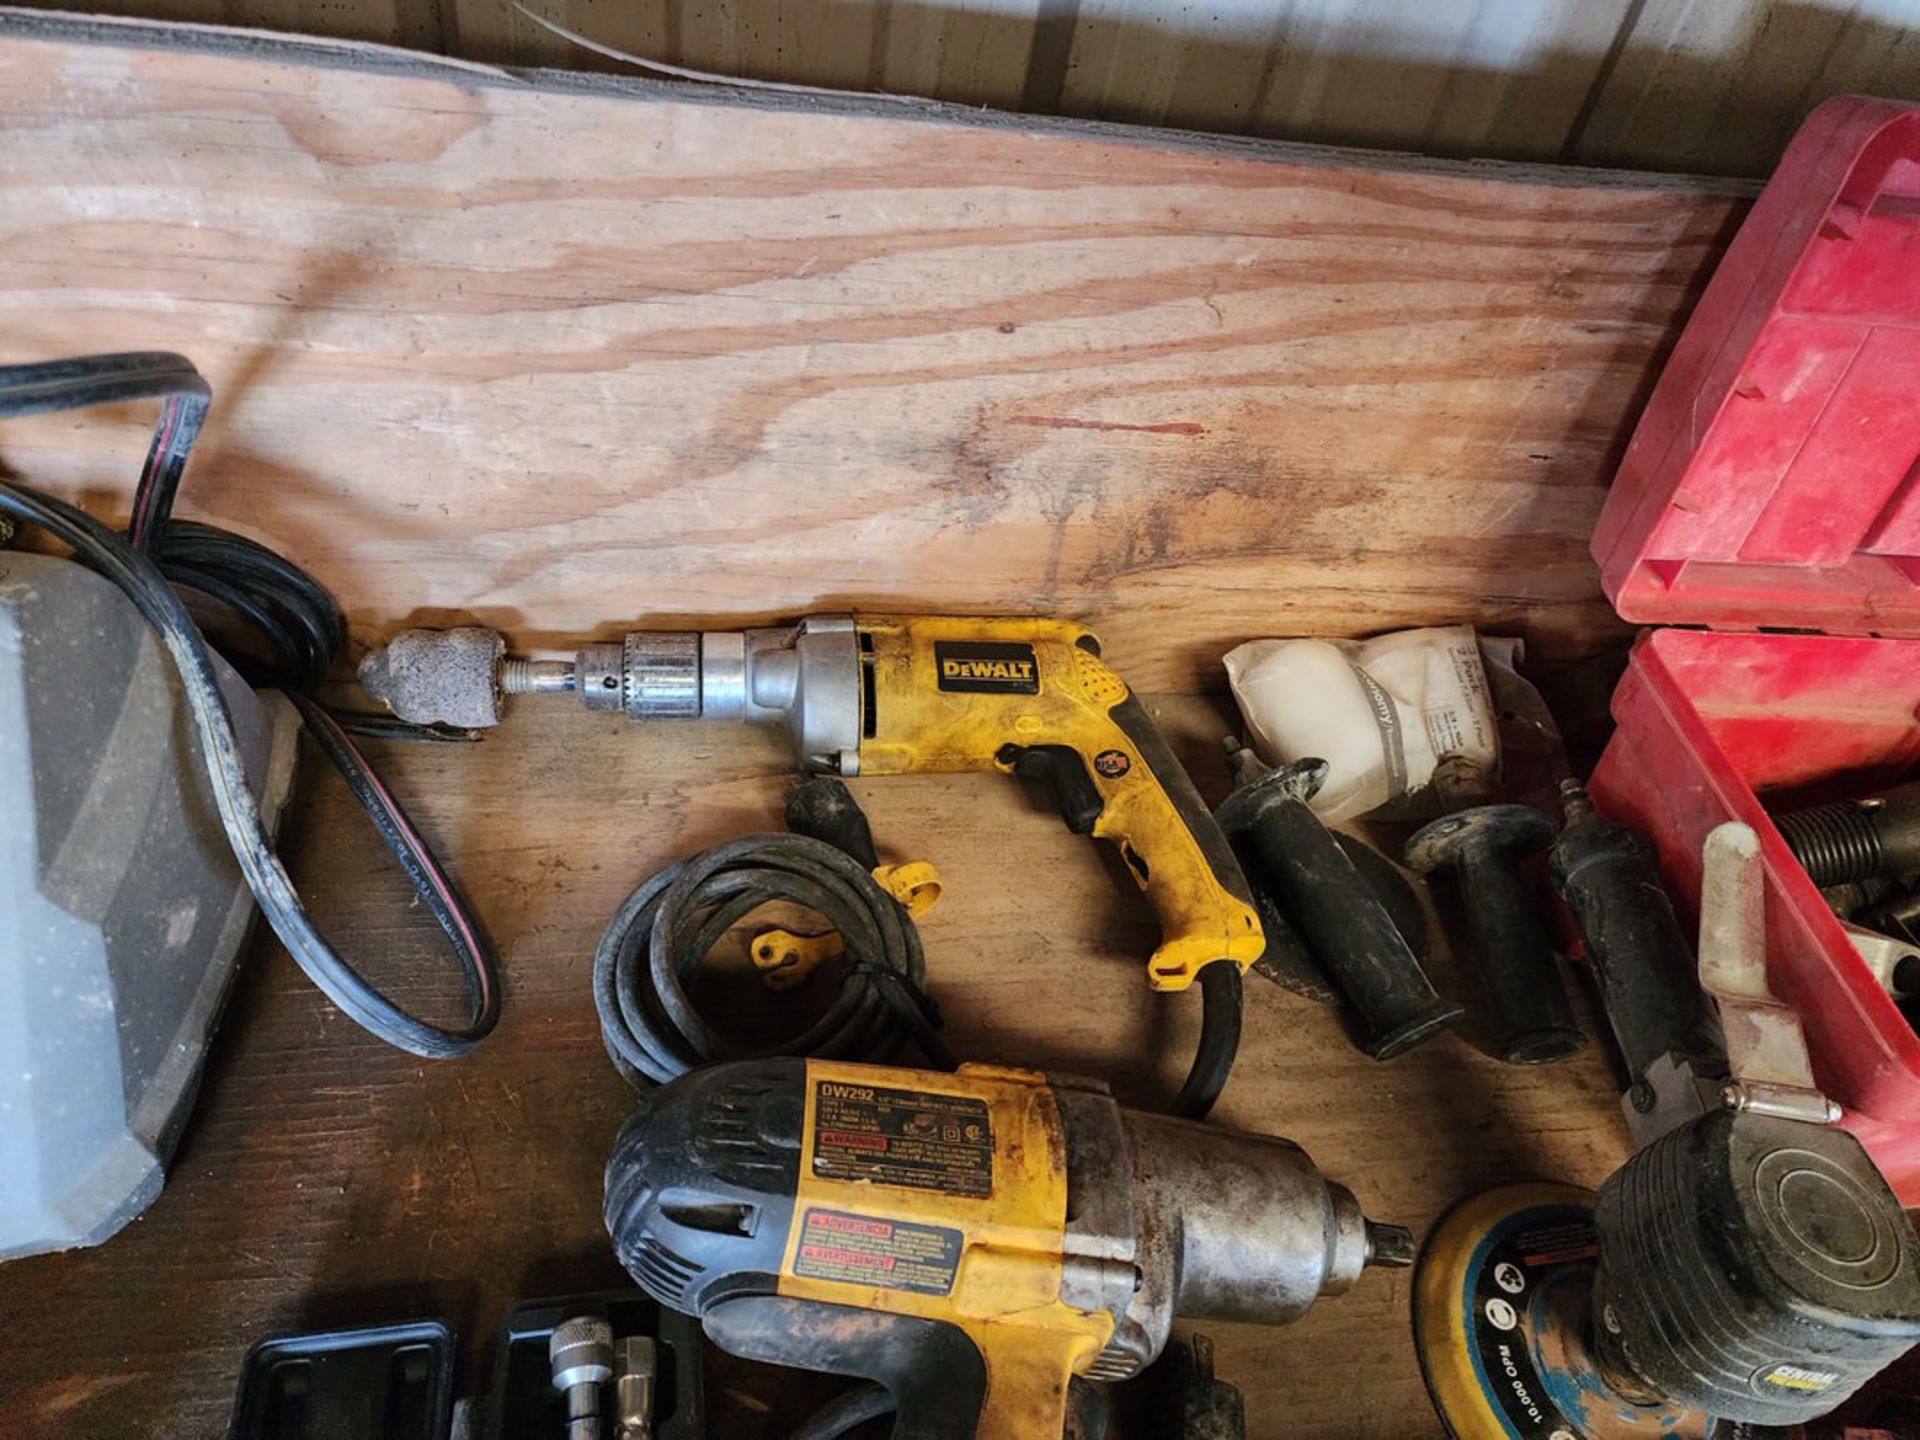 Contents Of Rack To Include But Not Limited To: (Welder Excluded) Assorted Power Tools; Drills; - Image 11 of 49